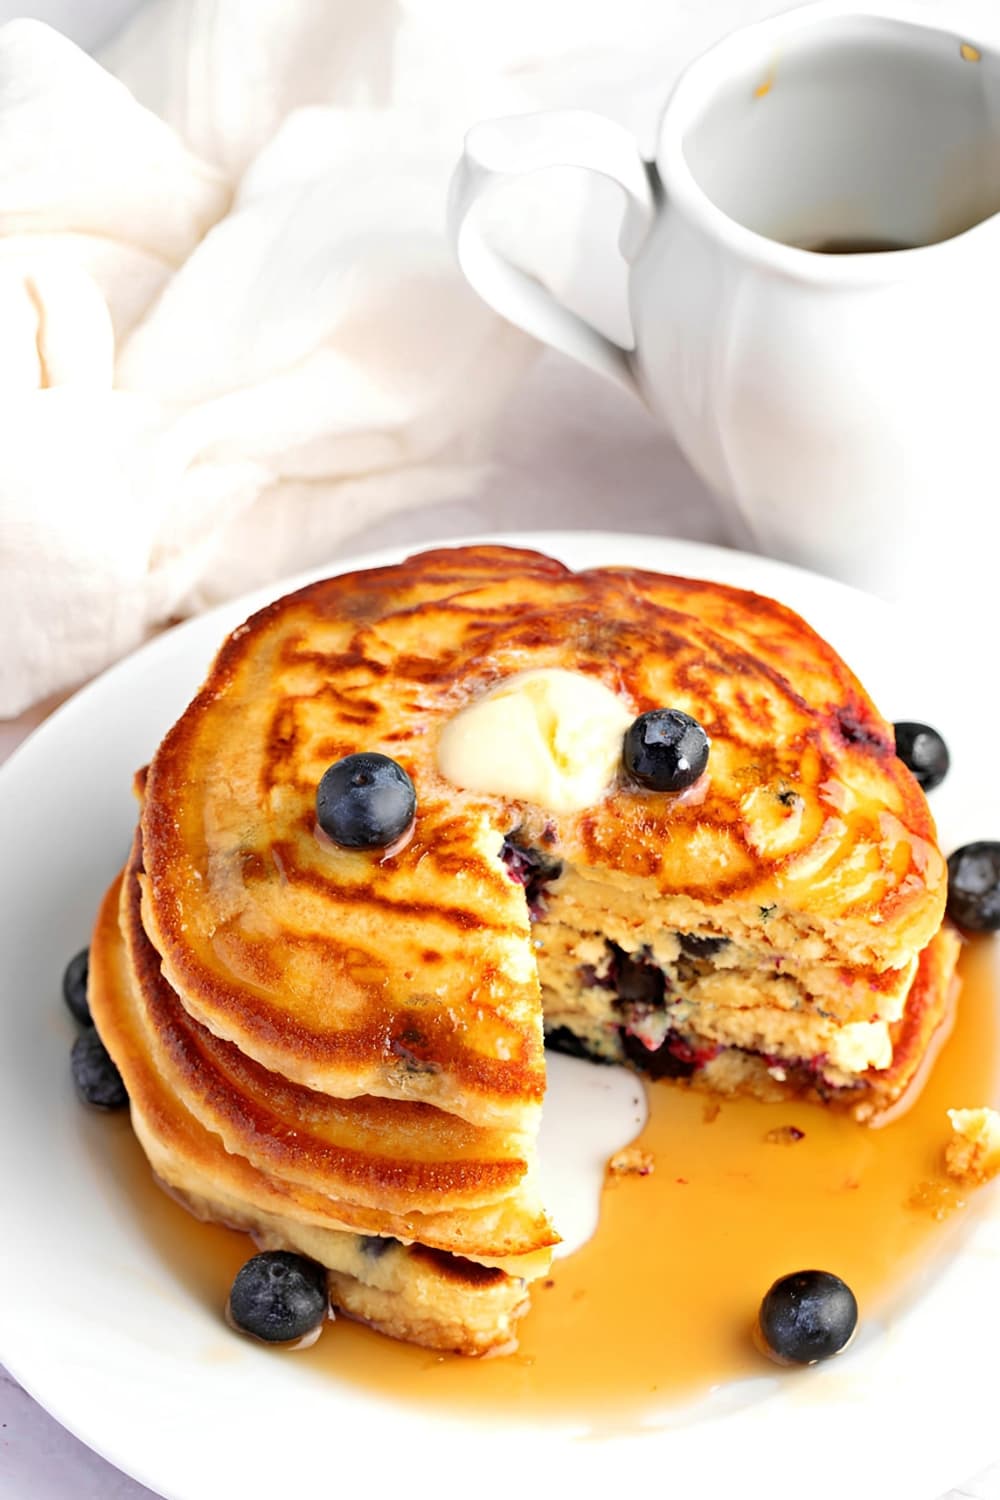 Stacks of Blueberry Pancakes on a Round Plate